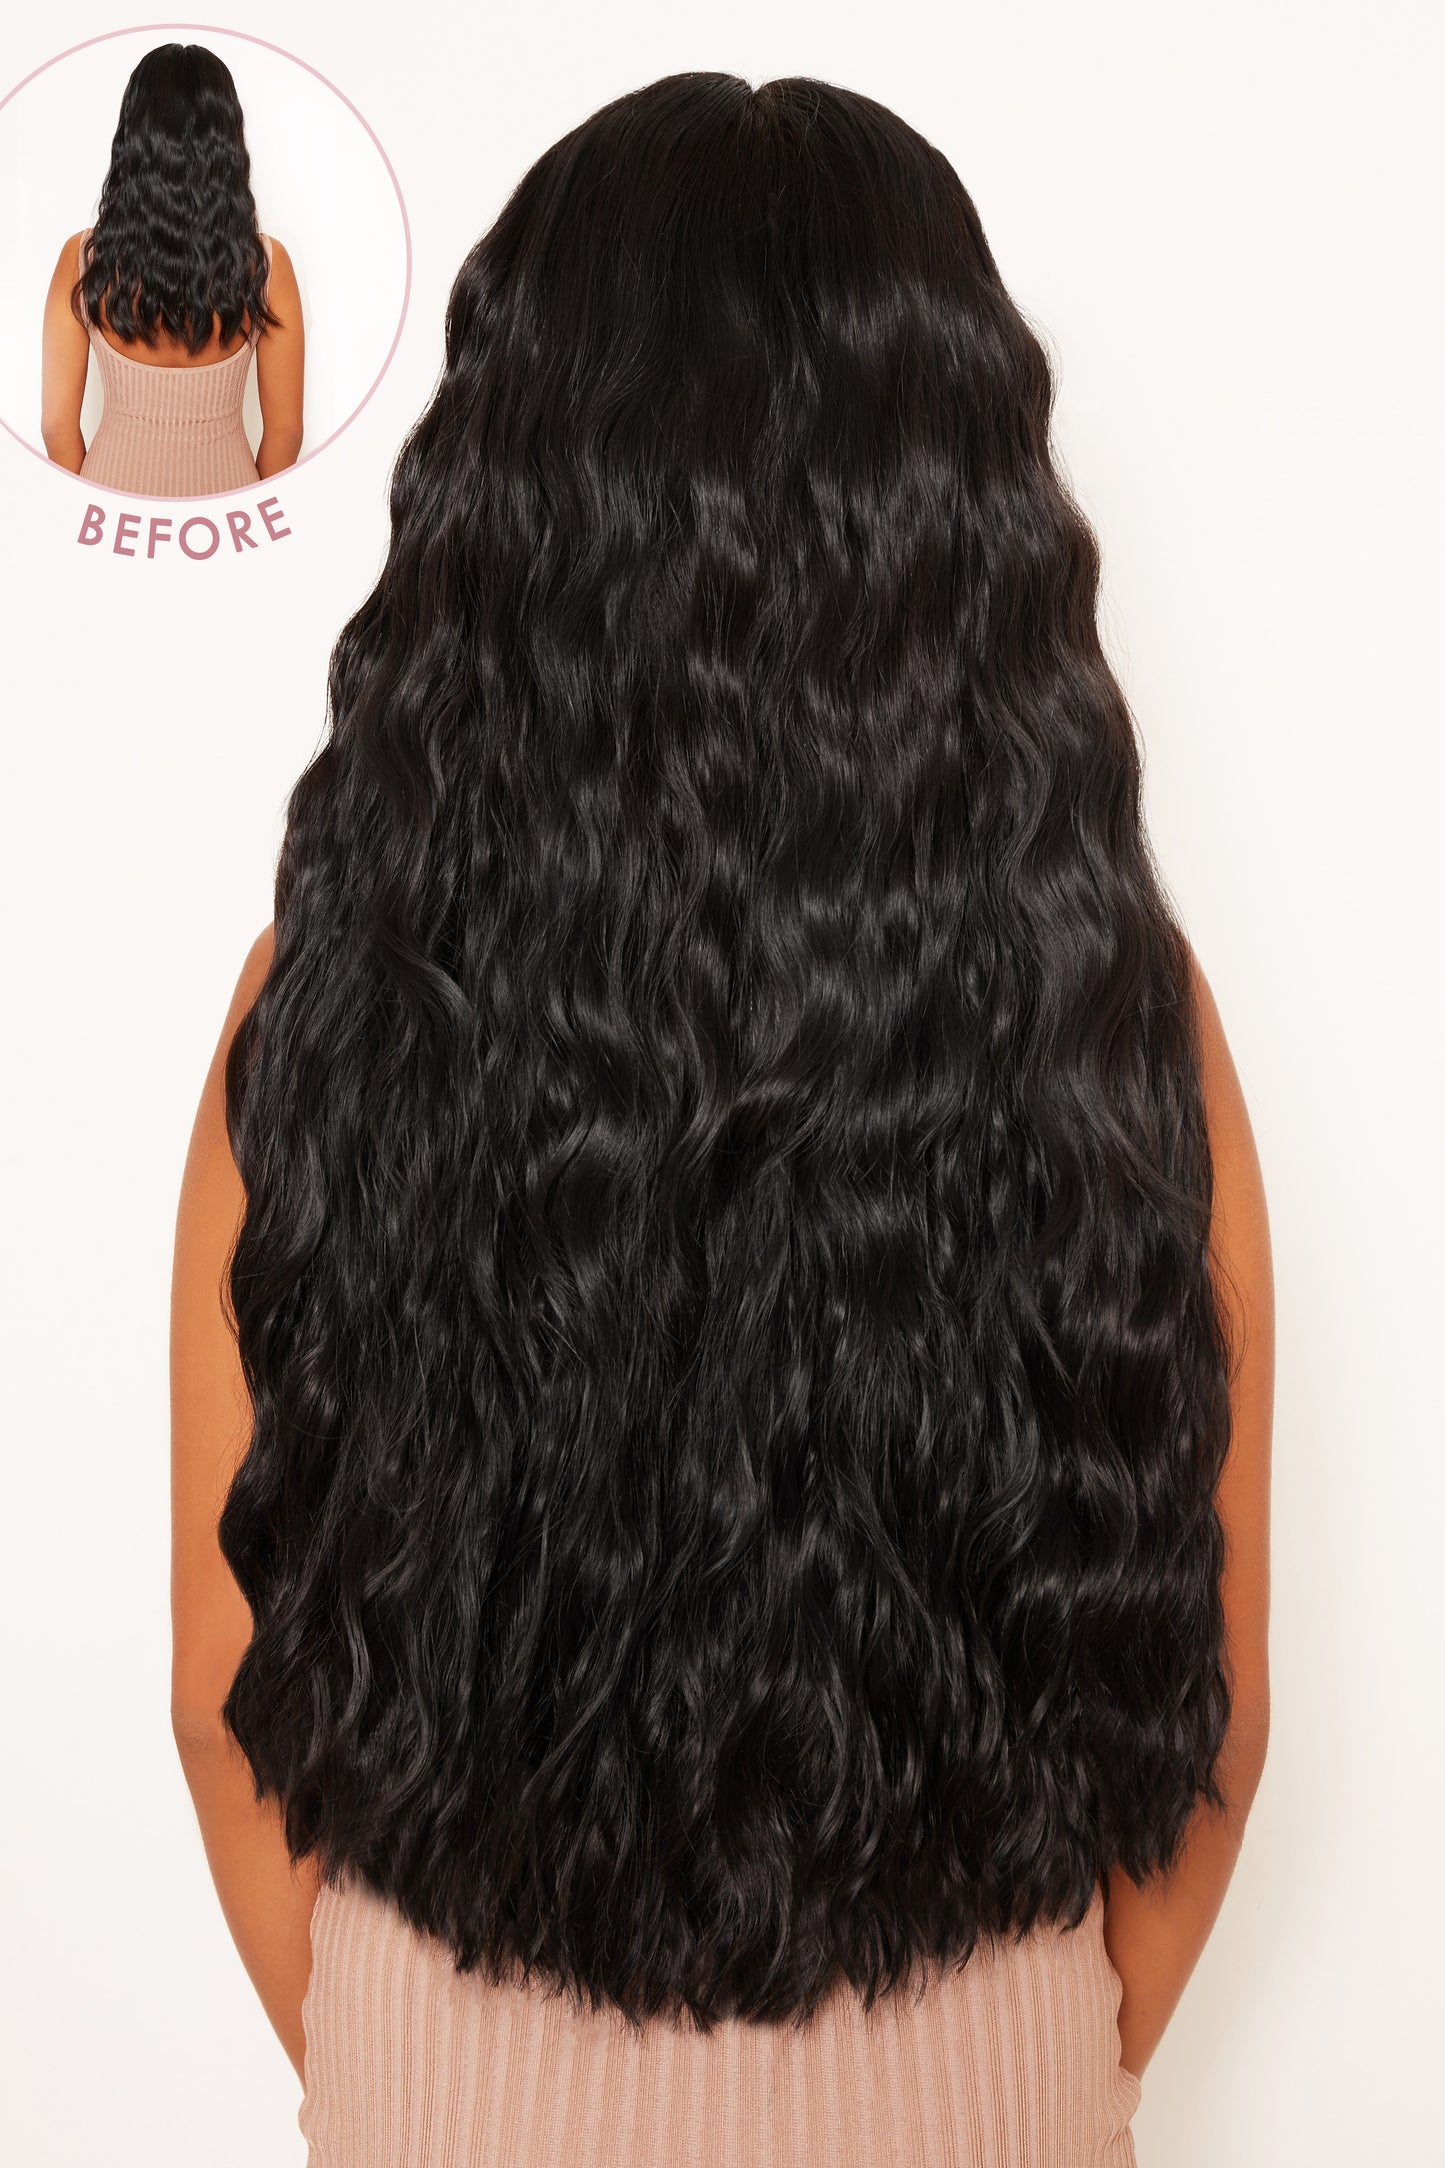 Super Thick 26" 5 Piece Waist Length Wave Clip In Hair Extensions